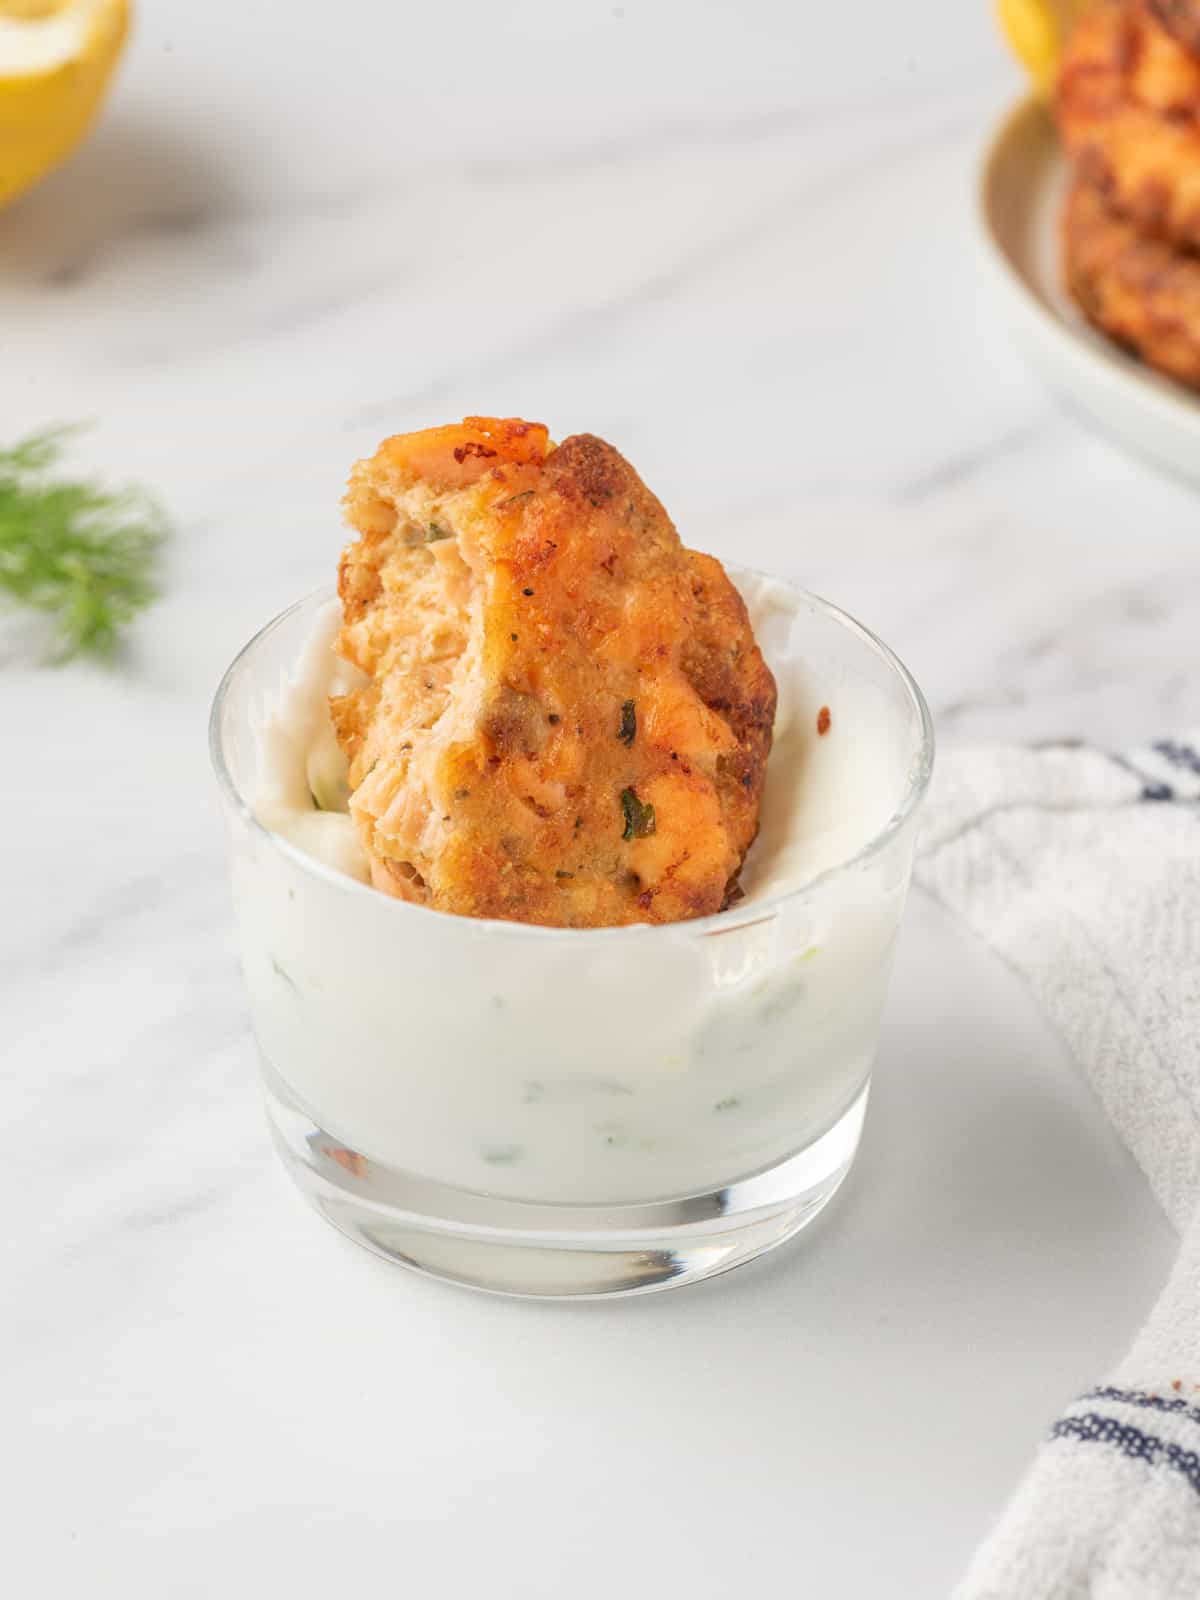 A bite of Salmon patties with bread crumbs being dunked in tzatziki sauce.